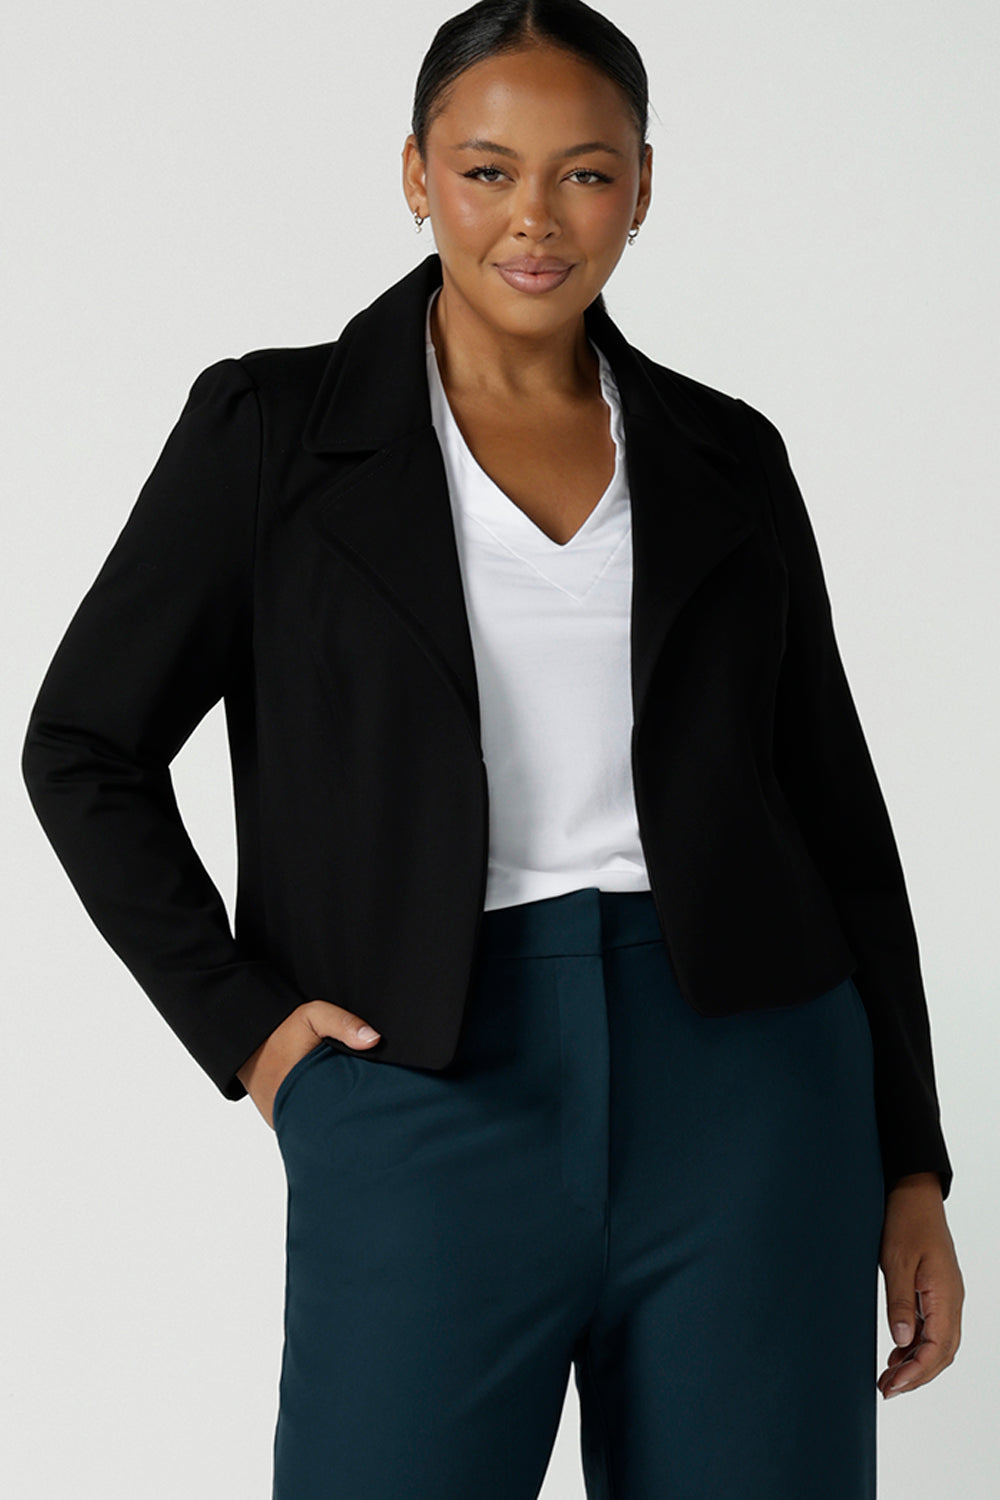 Size 16 woman wears the Garcia Jacket in Black. Tailored design with collar and comfortable stretch. Comfortable and stylish workwear for women. Size inclusive fashion and made in Australia for women size 8 - 24. Styled back with Yael wide leg pants in Petrol. 